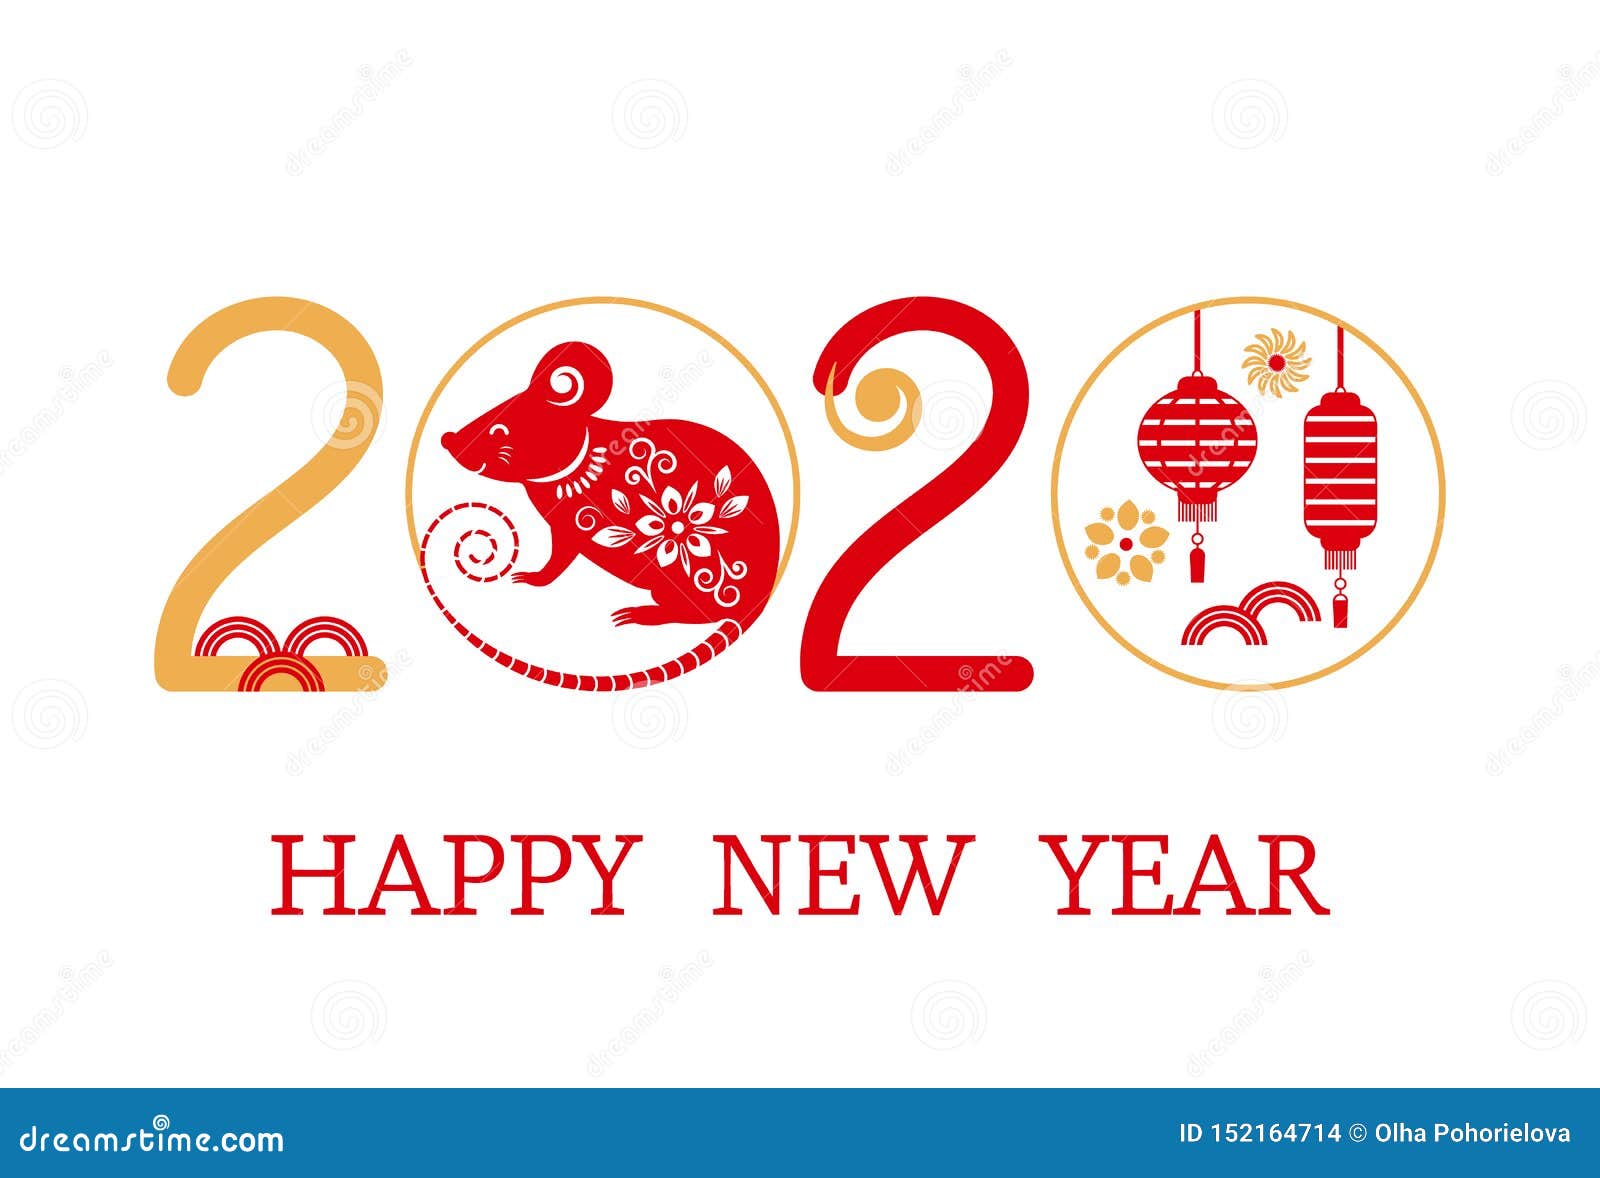 Postcard With The Chinese New Year 2020 Rat On The Astrological Calendar. Flat ...